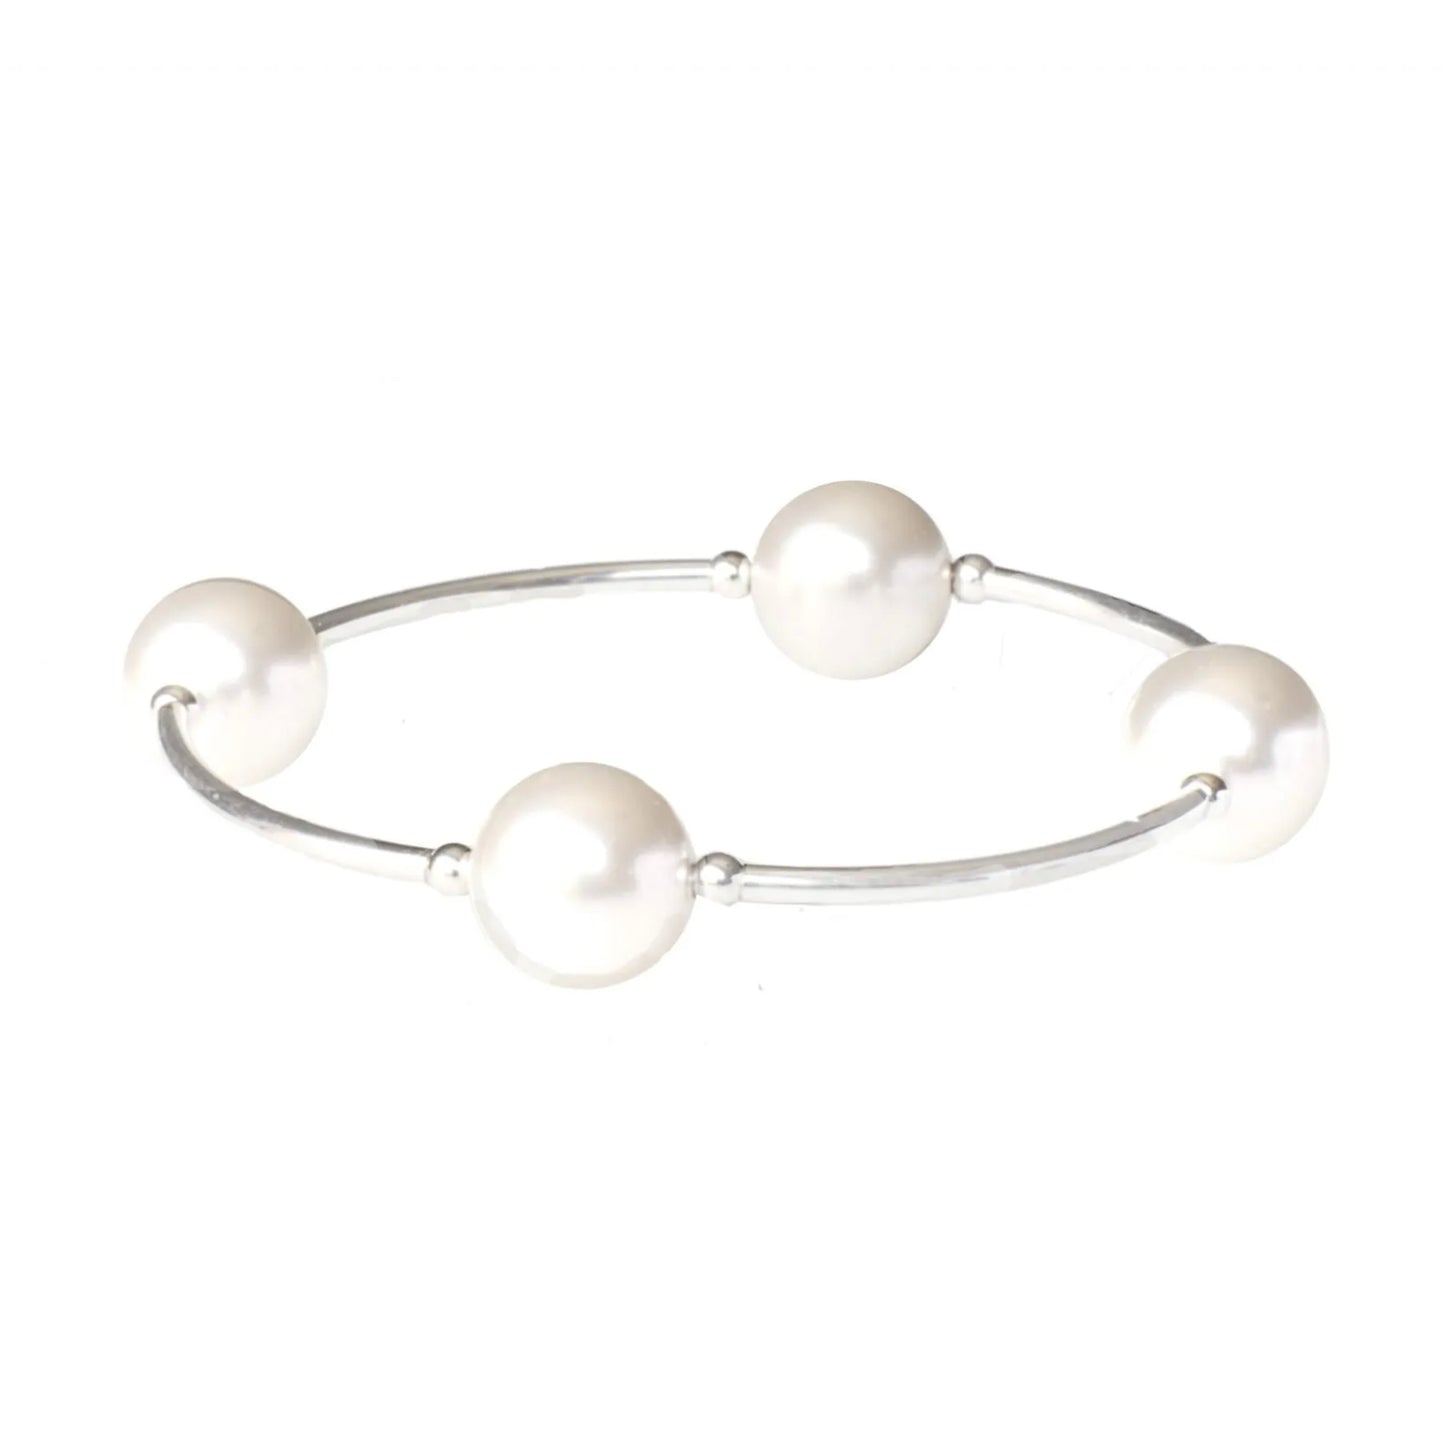 Made As Intended 12mm White Pearl Blessing Bracelet - Silver Links available at The Good Life Boutique